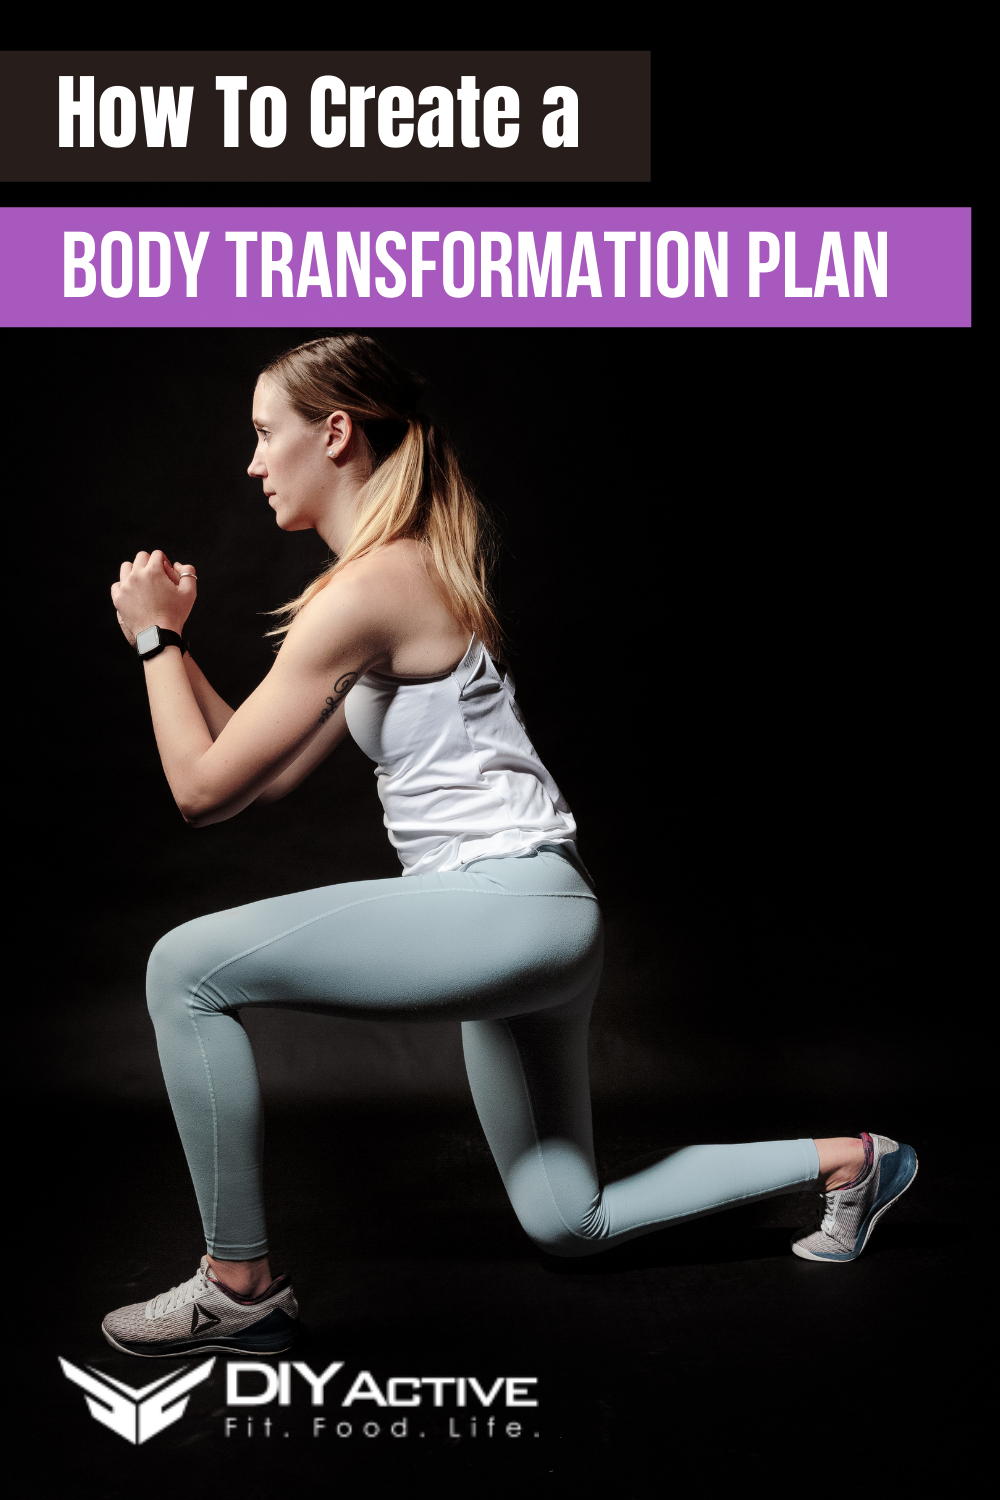 How To Create a Body Transformation Plan